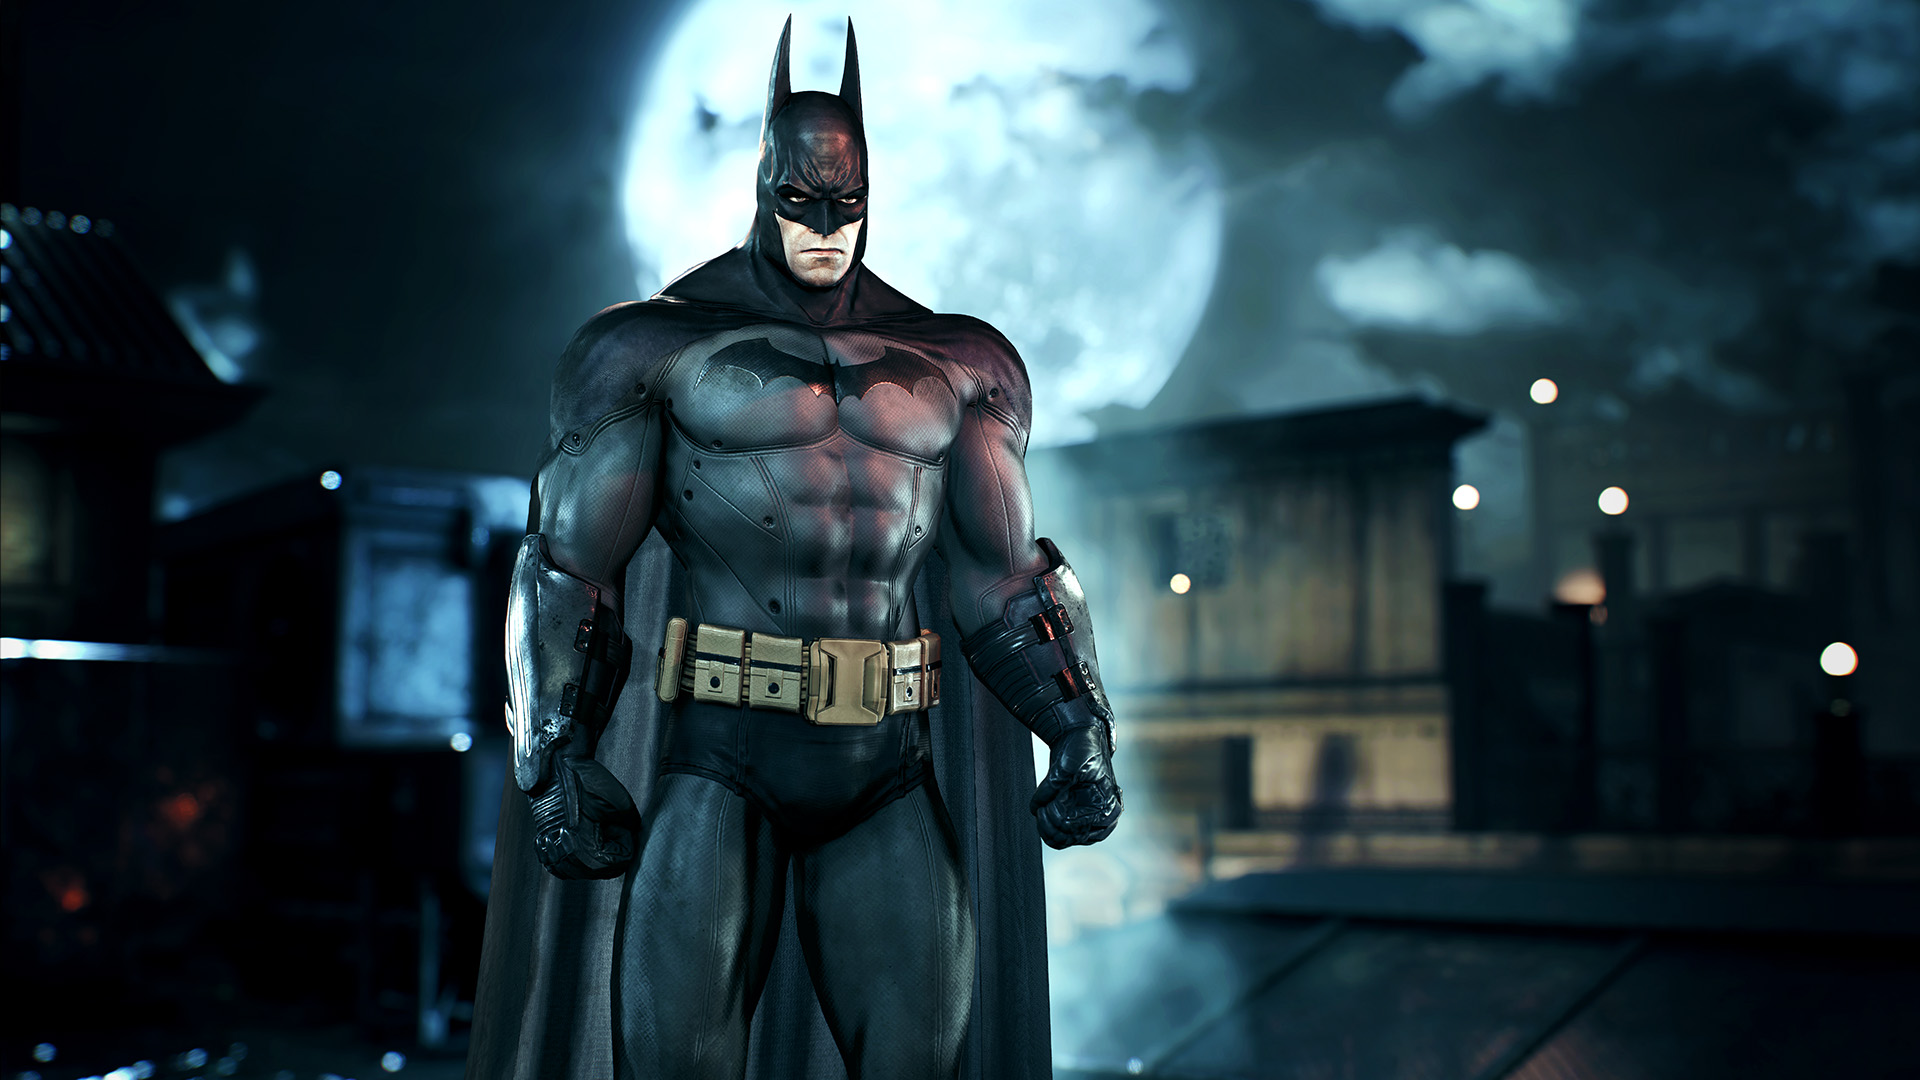 Latest Batman Arkham Knight DLC's available to download. Check out the ...